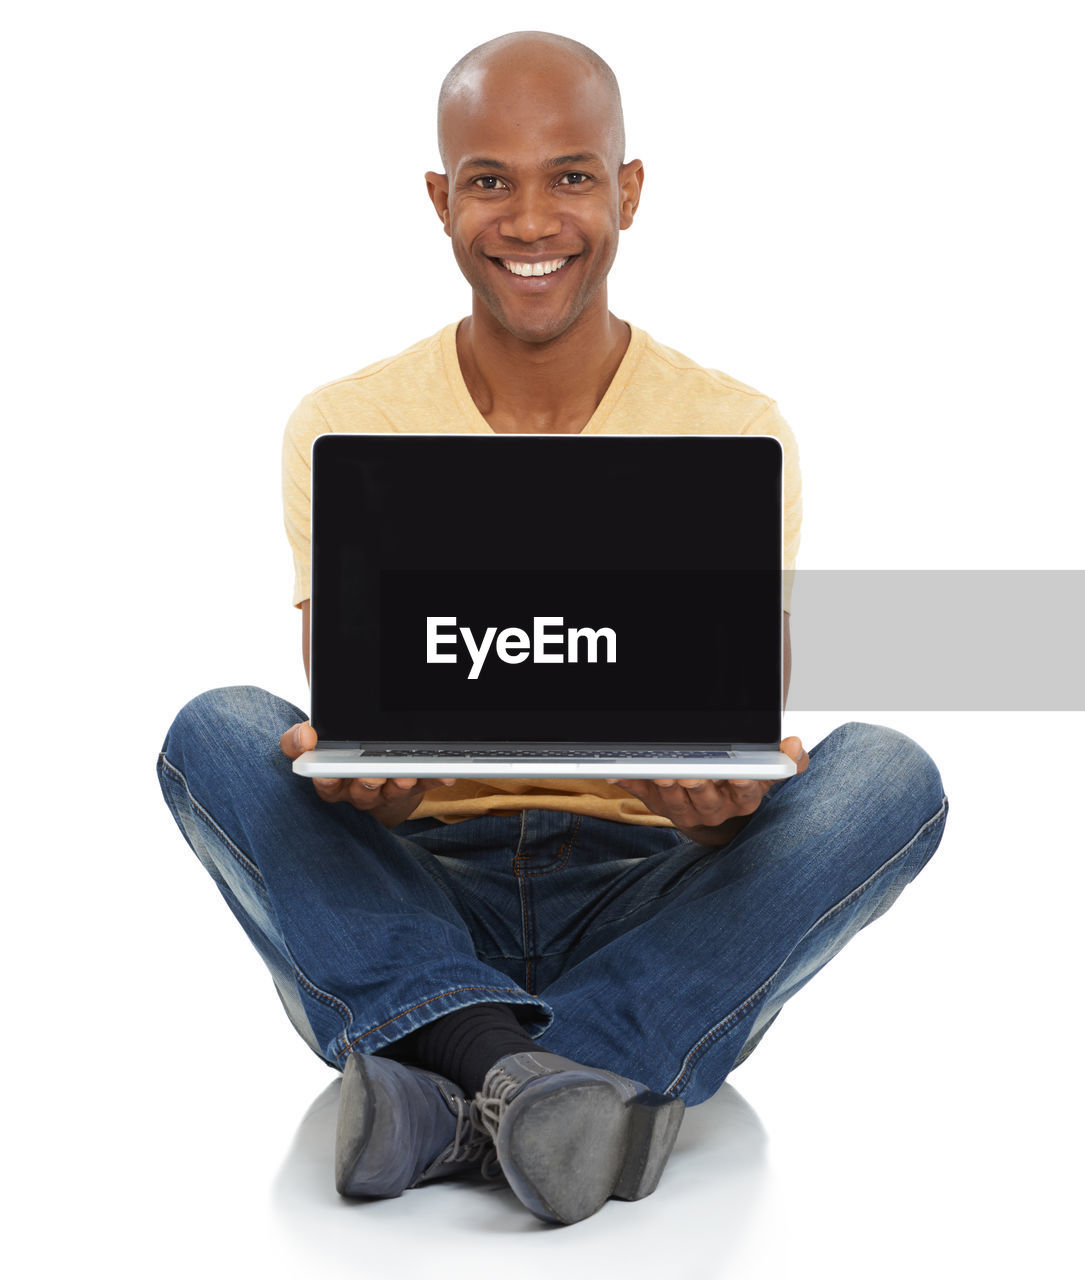 sitting, computer, smiling, laptop, technology, wireless technology, portrait, adult, communication, cut out, happiness, person, internet, computer network, one person, looking at camera, using laptop, casual clothing, white background, indoors, cheerful, studio shot, emotion, young adult, business, e-mail, front view, relaxation, men, copy space, jeans, clothing, smile, positive emotion, finger, shaved head, full length, portability, teeth, using computer, computer equipment, business finance and industry, human face, occupation, working